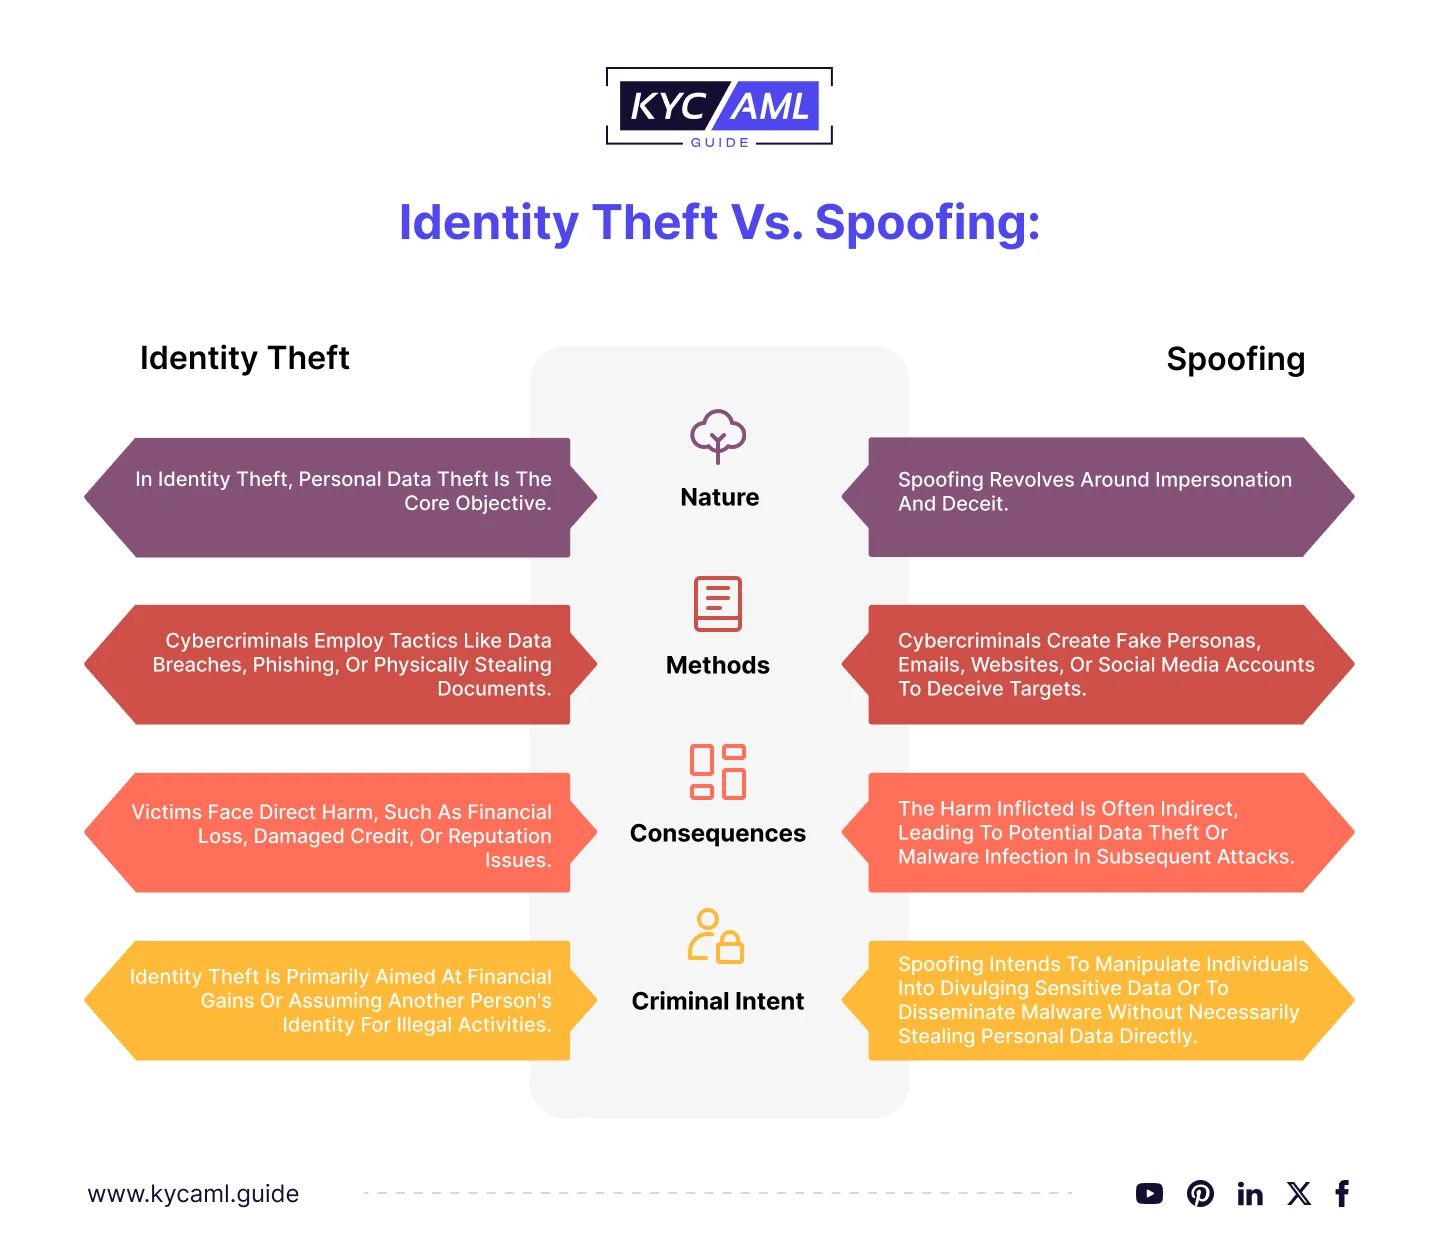  Identity Theft vs. Spoofing_ Key Differences